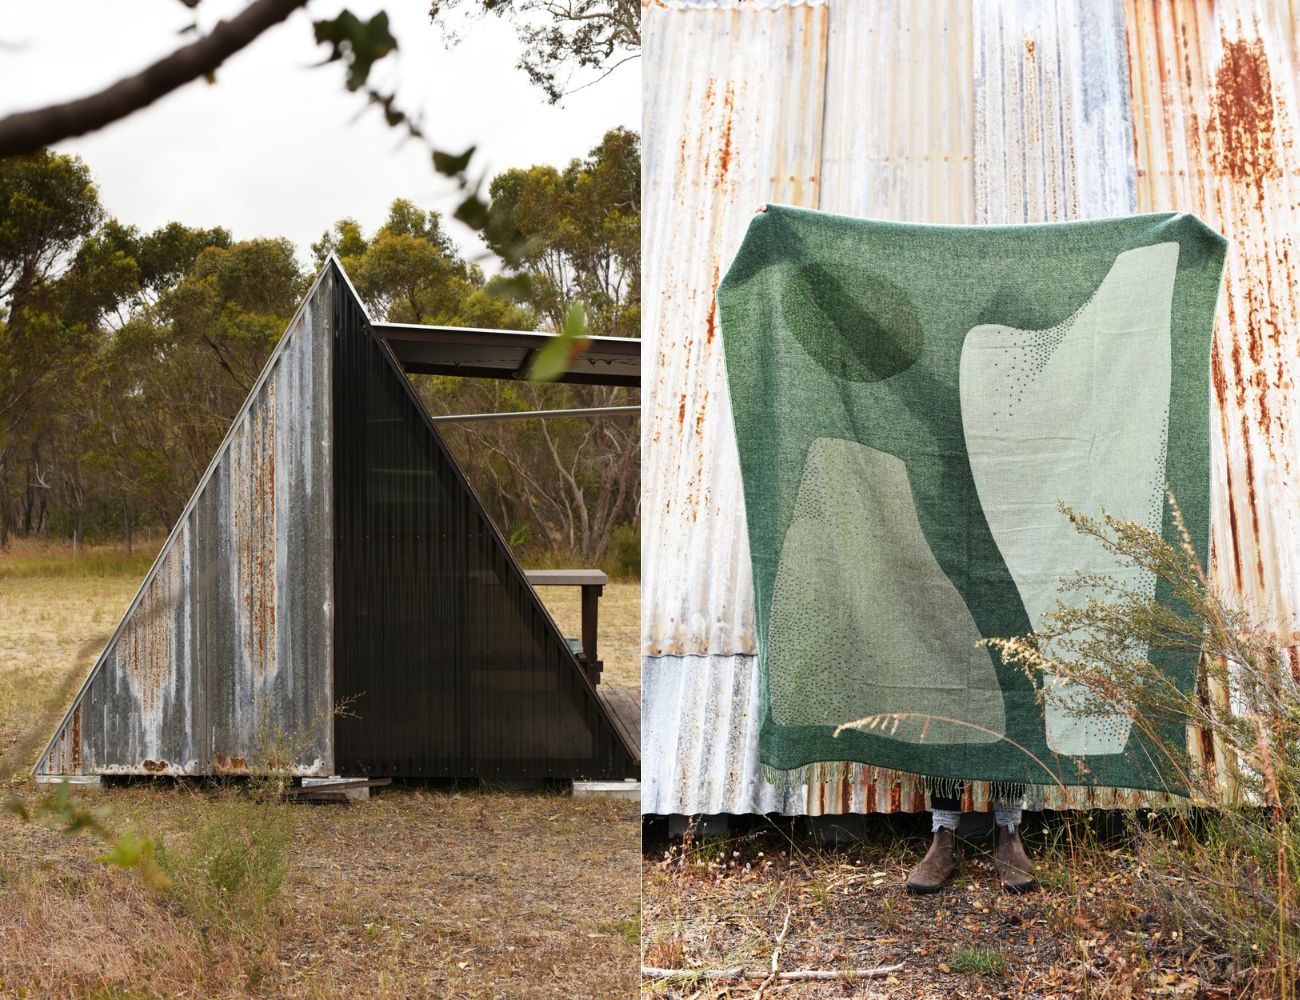 A frame corrugated iron shack beside a person holding up a Pyramid blanket